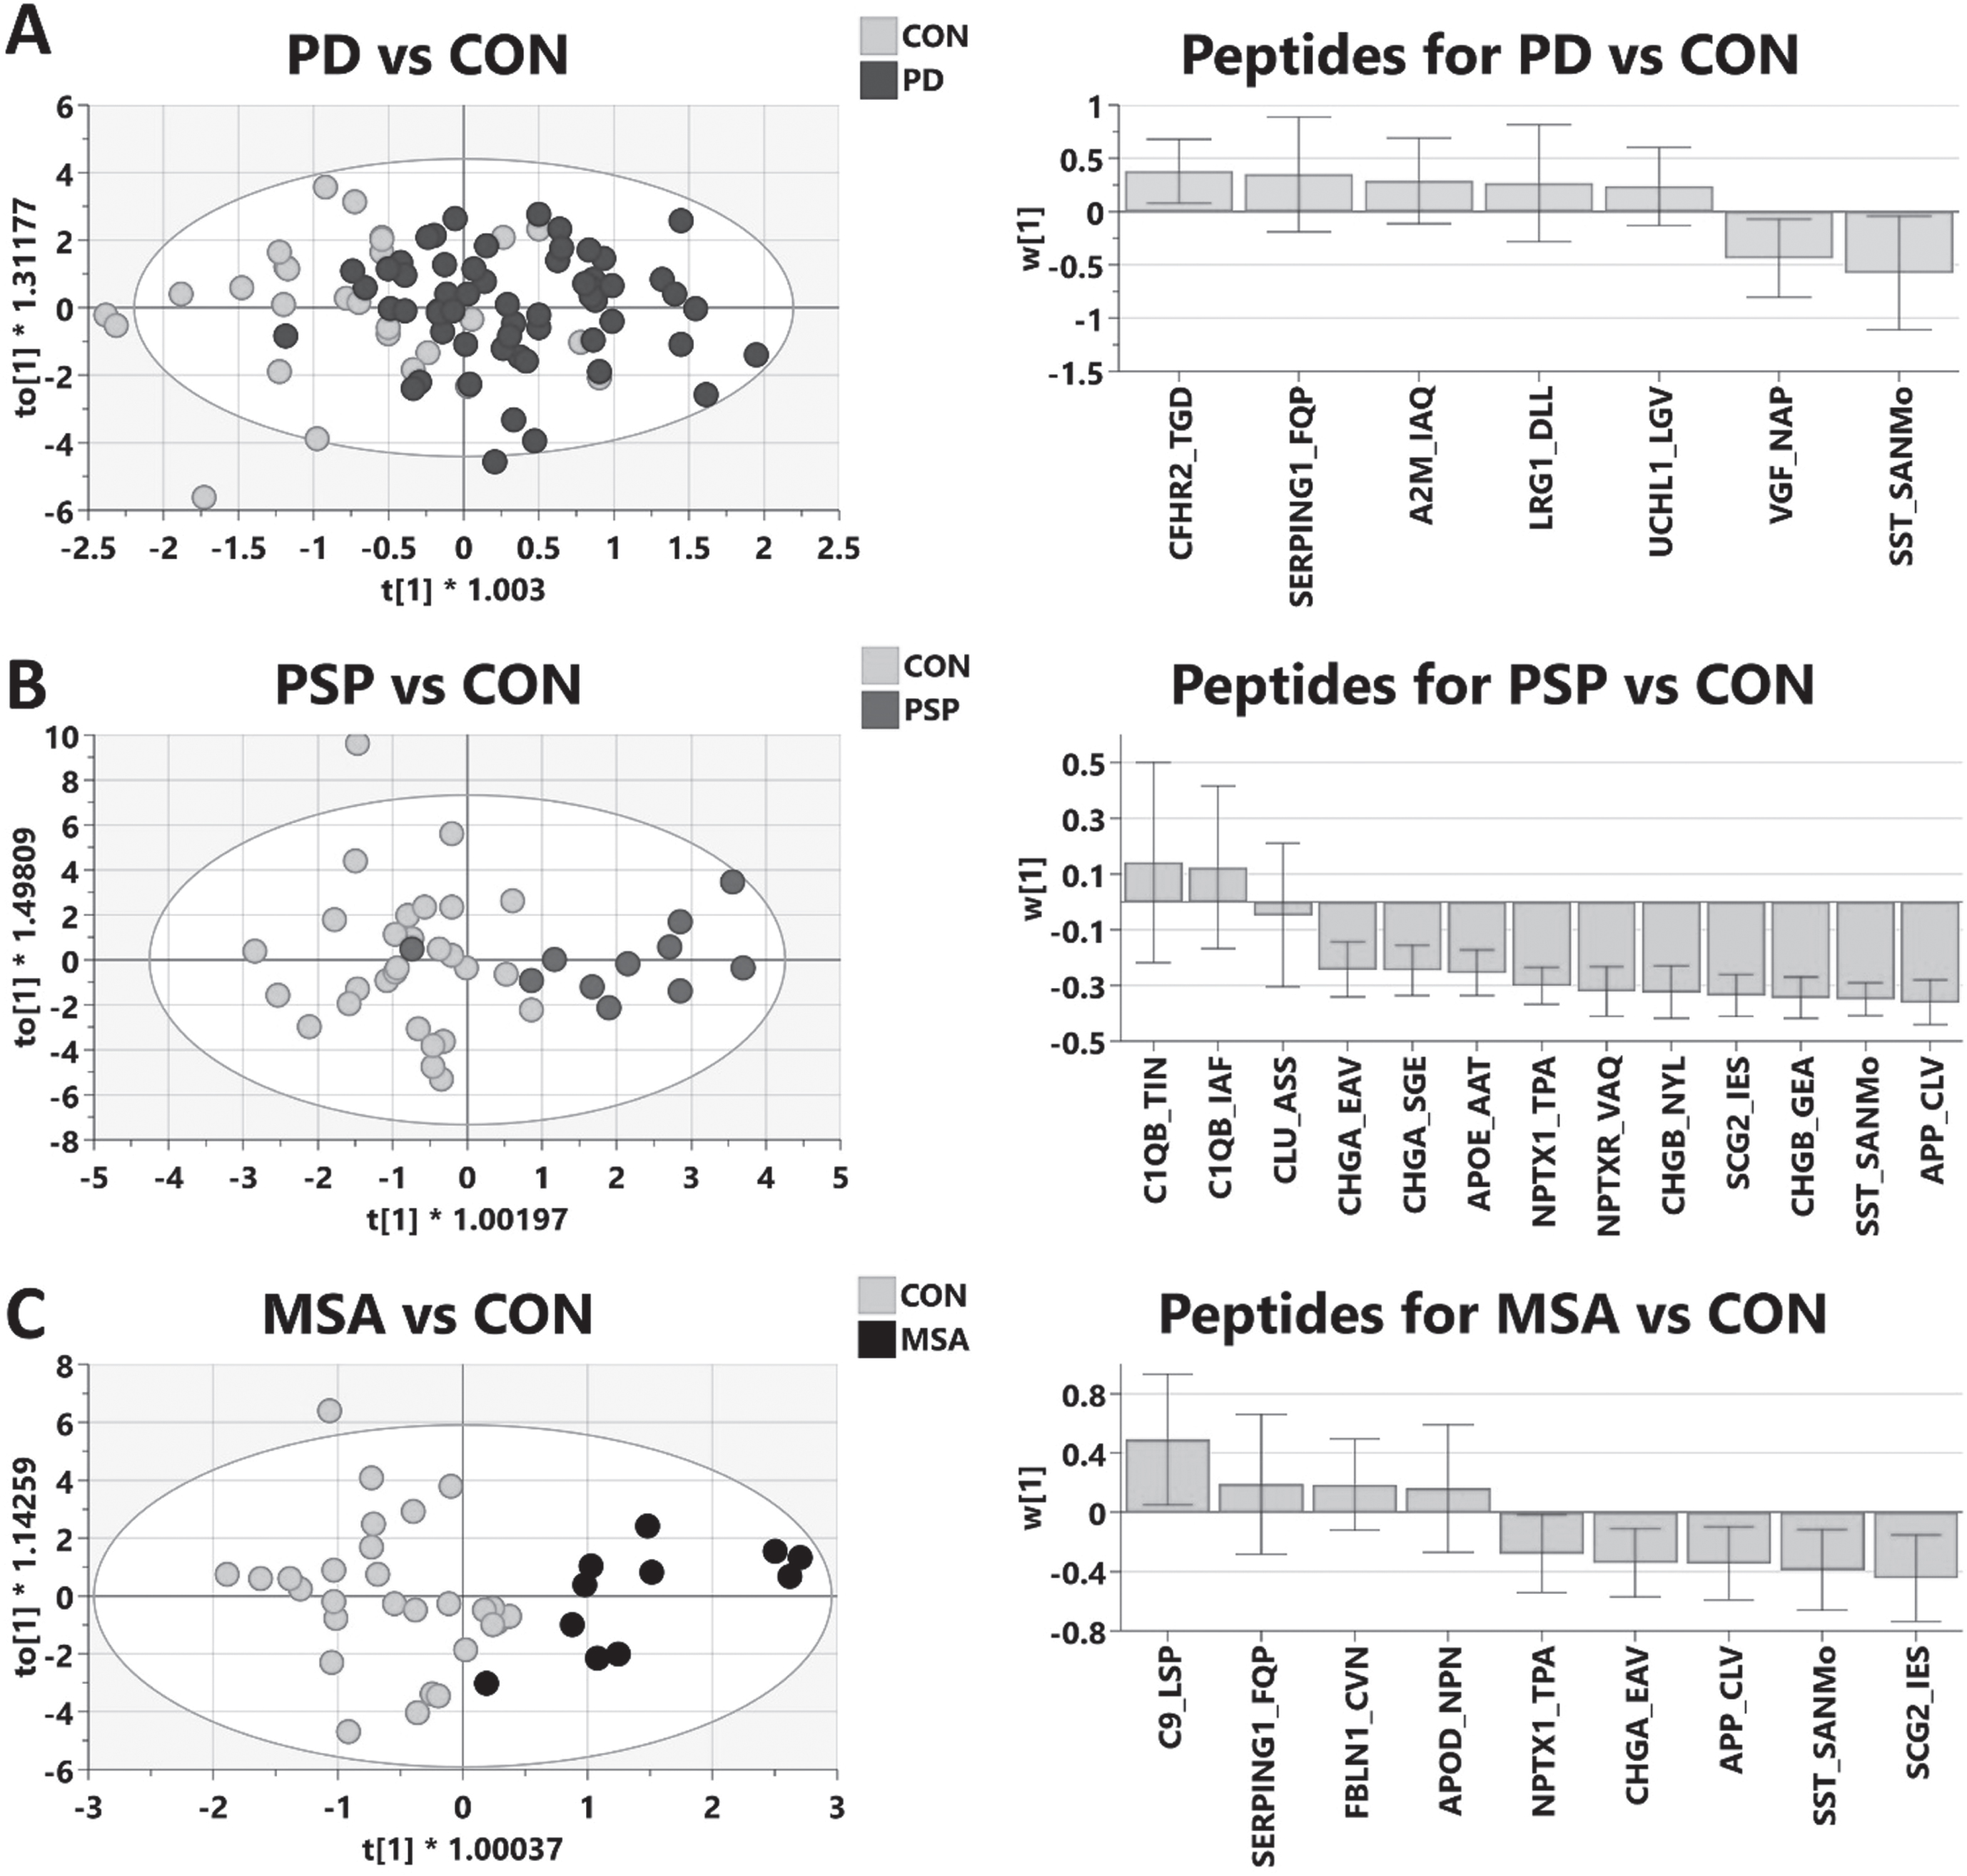 Multivariate modeling of MRM validation comparing parkinsonian diseases to healthy control (CON). Linear regression analysis was employed to identify top candidates from MRM validation to build models for each disease. Further refinement results in optimized models shown. Left panels are OPLS-DA scores plots; right panels are weights of individual peptides contributing to optimized model.The positive weights indicate an increase in disease compared to control. Model statistics: A)PD (n = 59) vs. Control (n = 28): R2X = 0.933, R2Y = 0.339, Q2 = 0.24, p = 0.015; B) PSP (n = 11) vs. Control (n = 28): R2X = 0.921, R2Y = 0.631, Q2 = 0.563, p = 9.4e-5; C) MSA (n = 11) vs. Control (n = 28), R2X = 0.937, R2Y = 0.668, Q2 = 0.533, p = 0.0016.